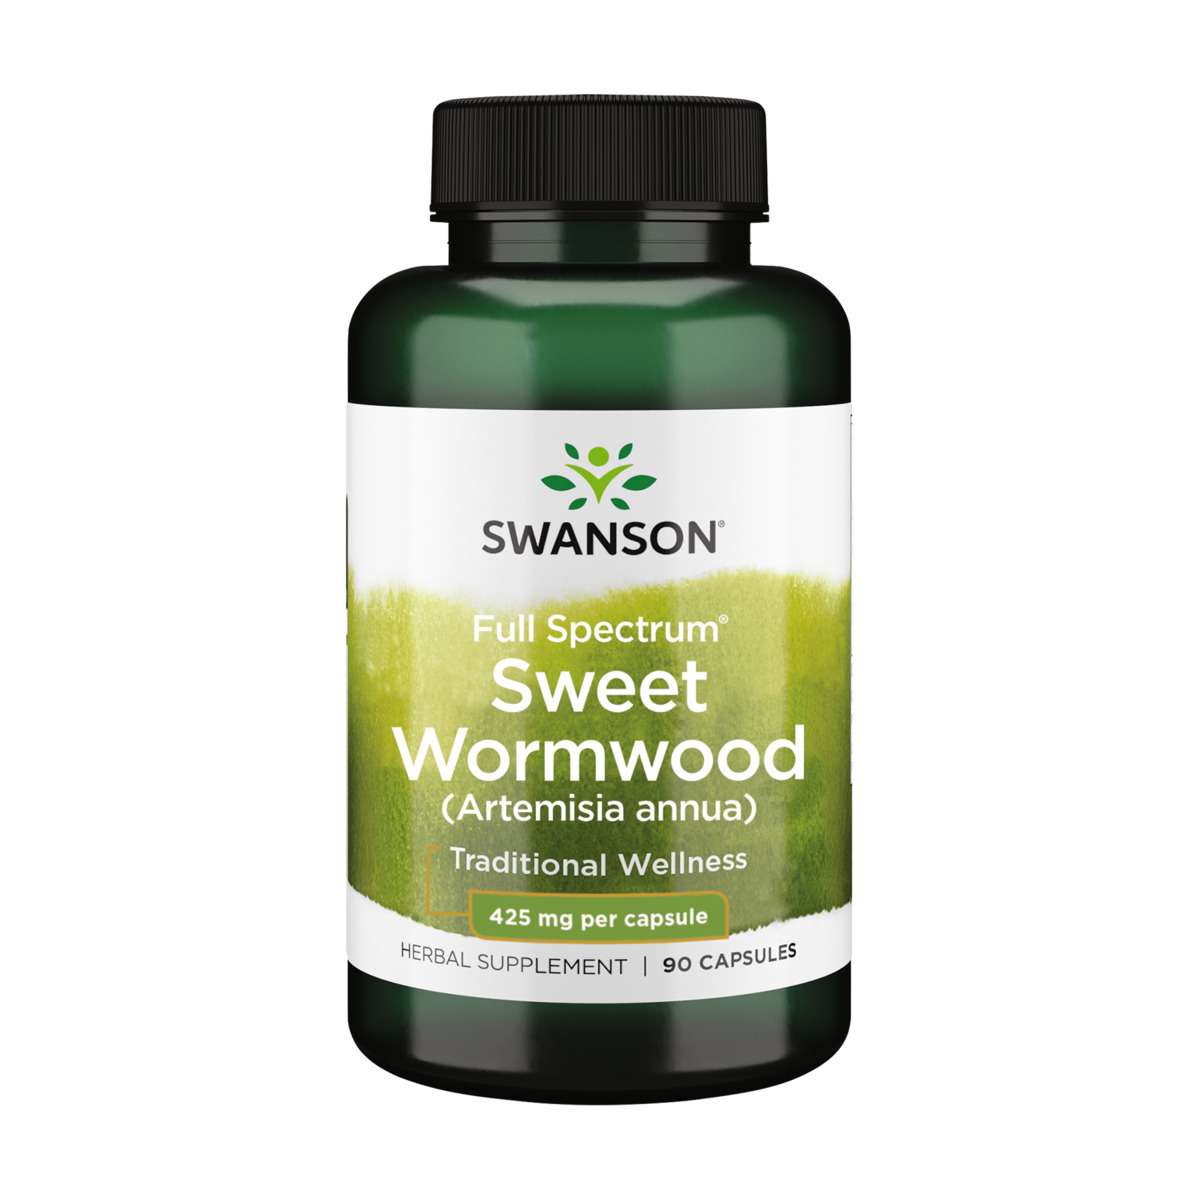 Swanson Sweet Wormwood - May Promote GI Gut Health, Microbial Balance and Dig...